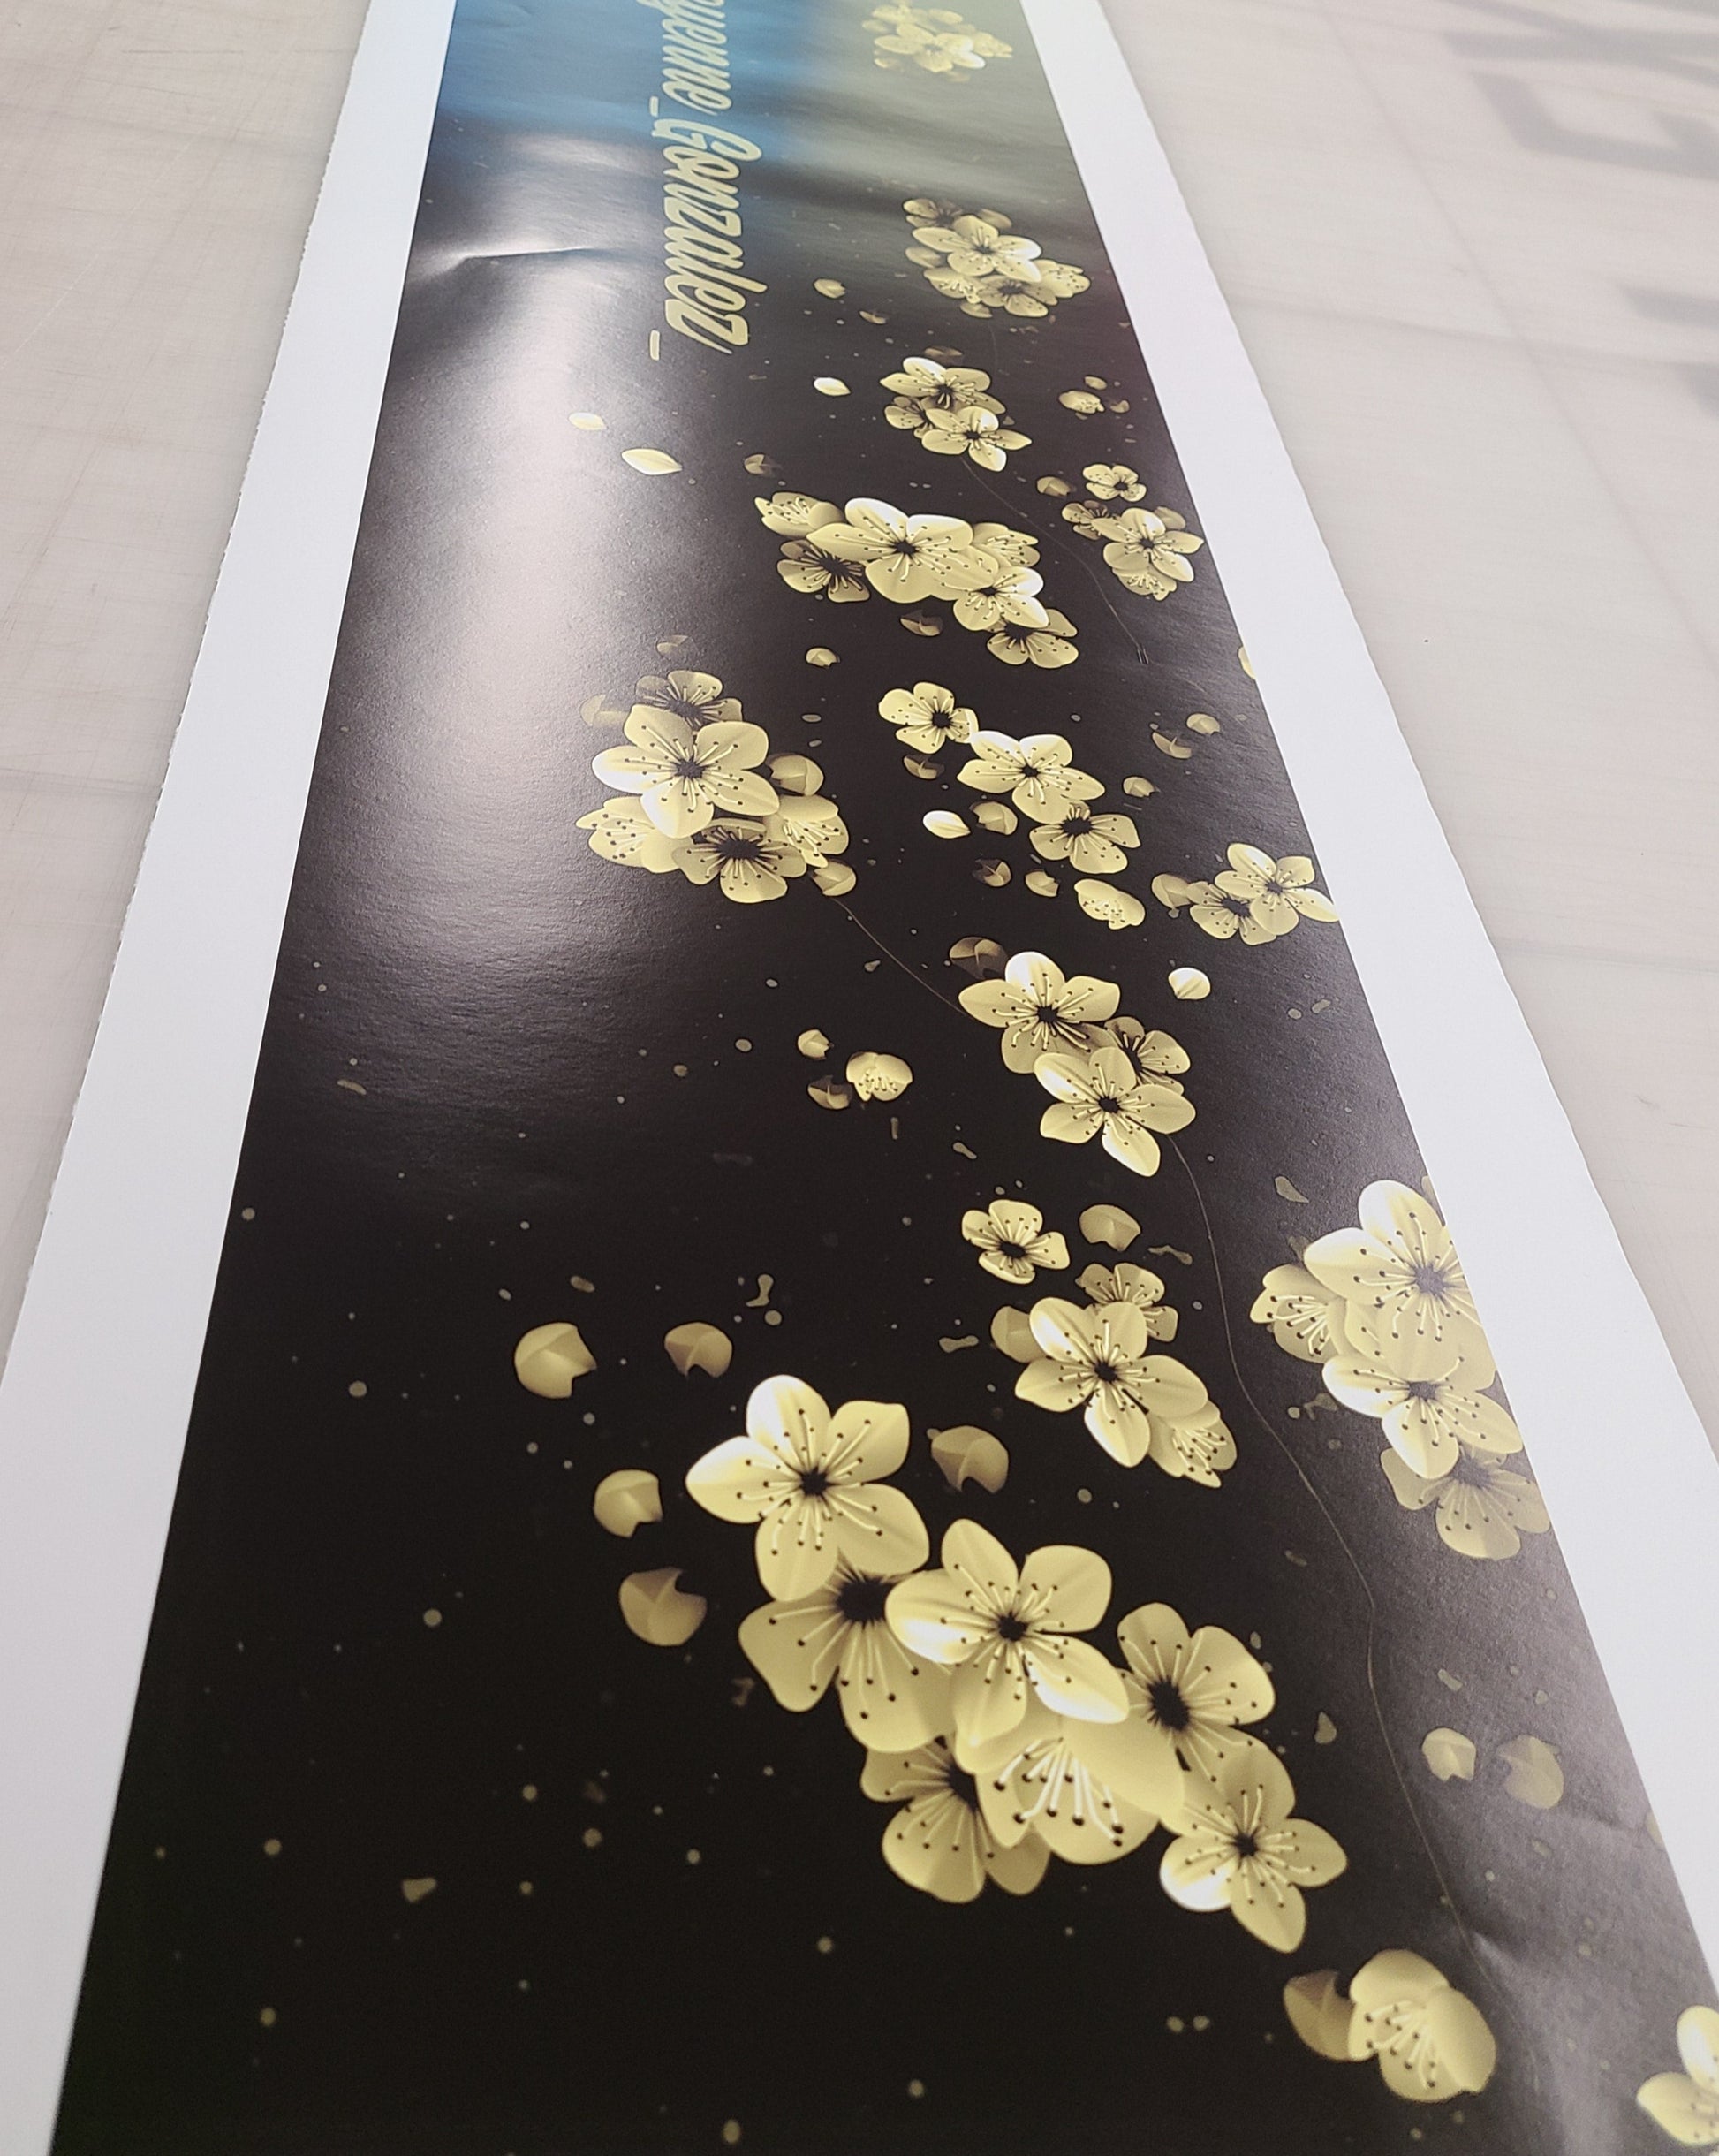 digital print car front windshield banner with cherry blossoms. Fully customizable to match your style and car.